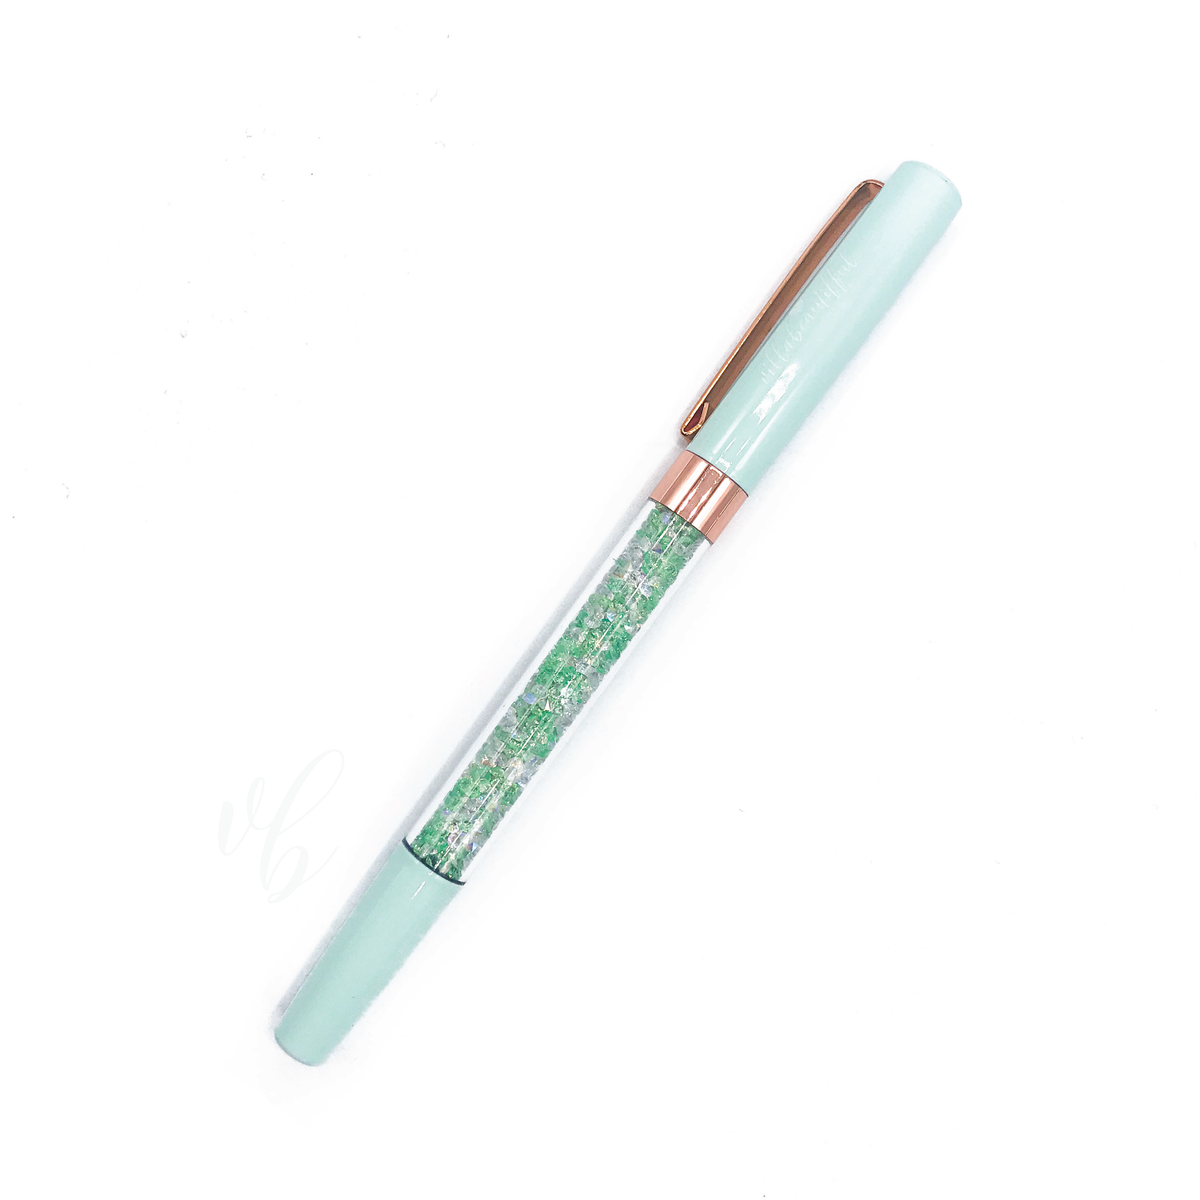 Yumi Imperfect Crystal VBPen | limited pen